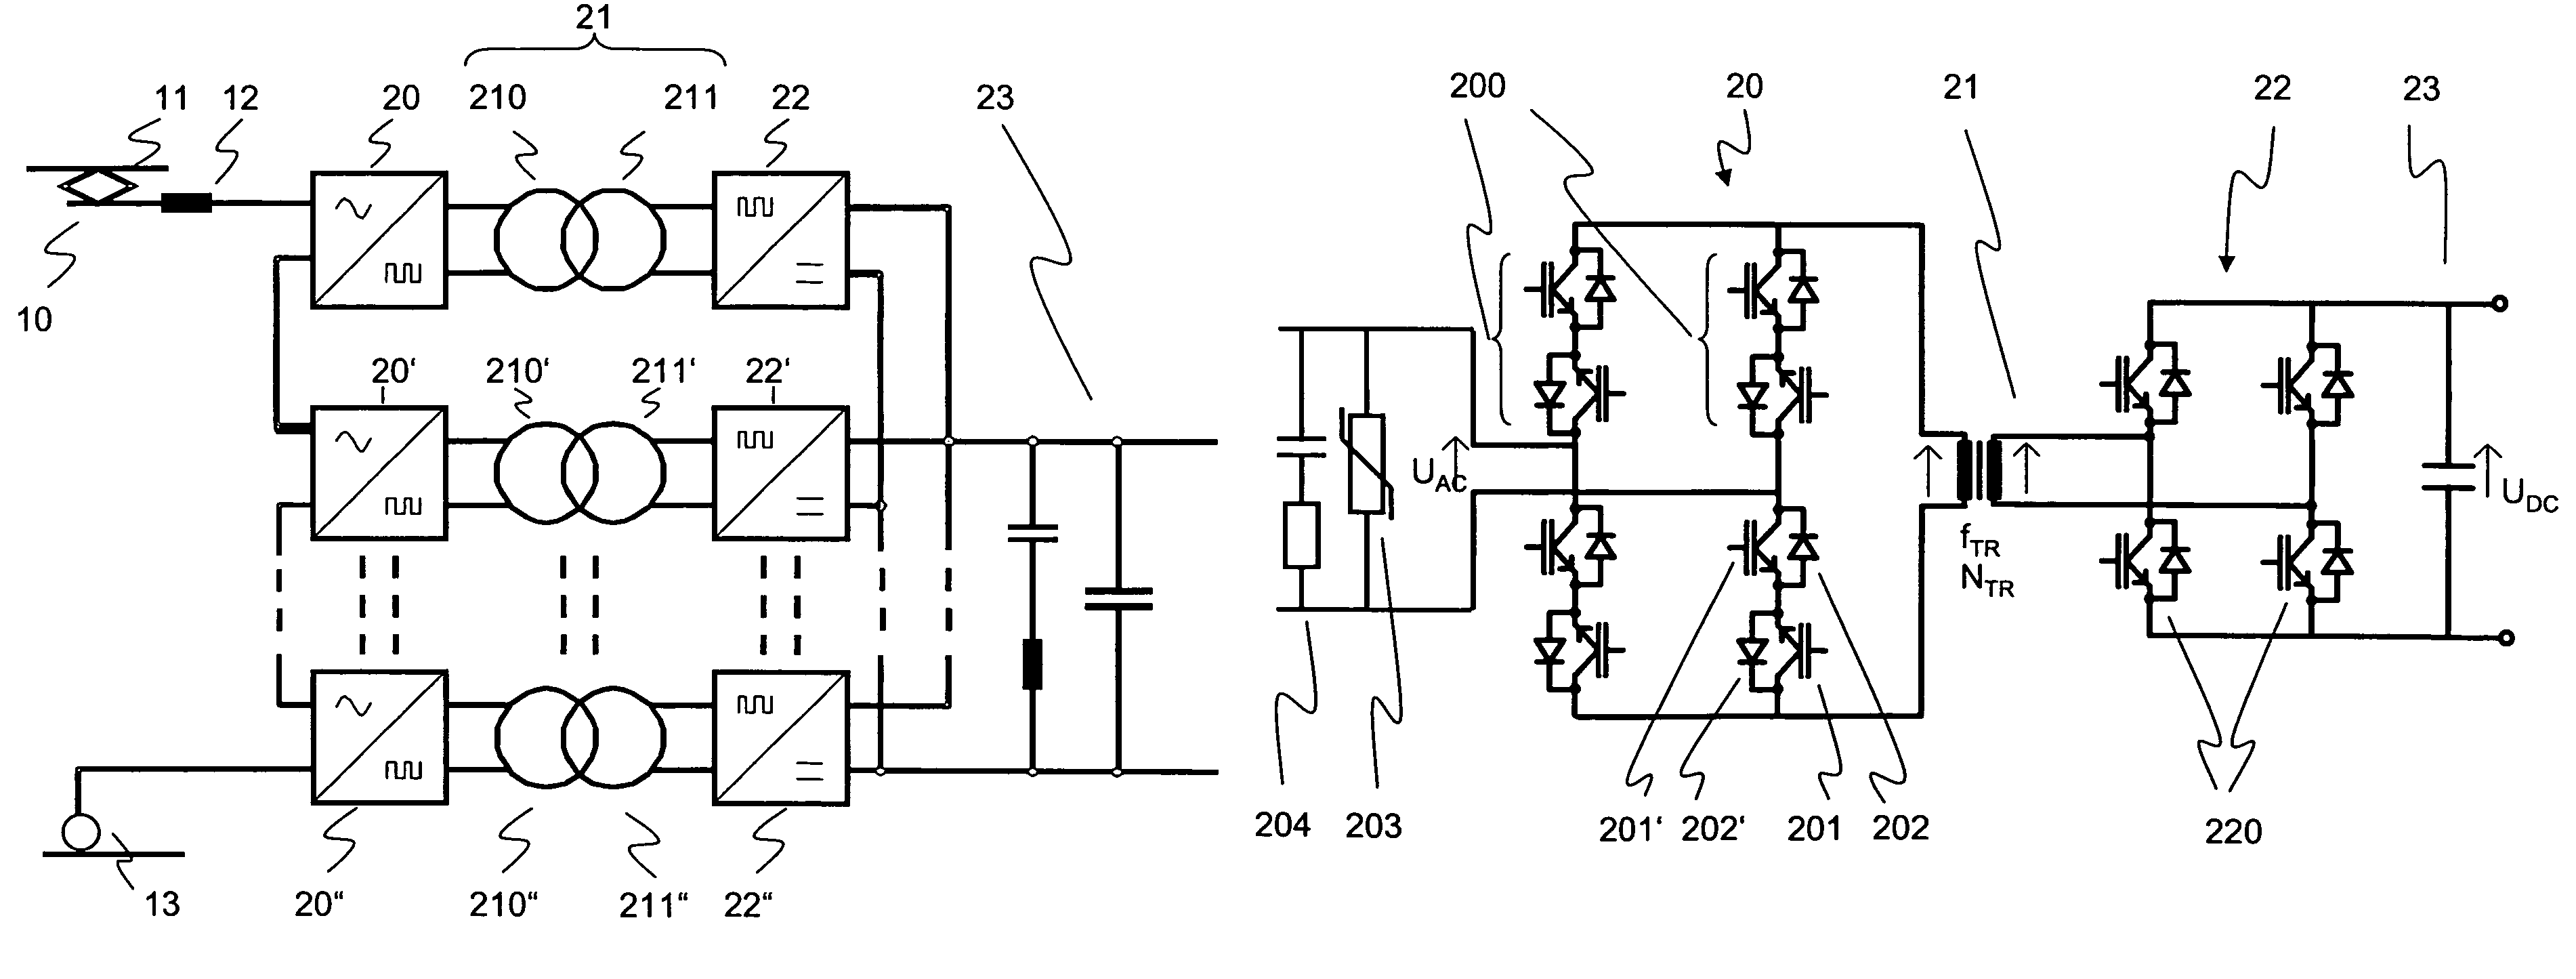 Multilevel AC/DC converter for traction applications